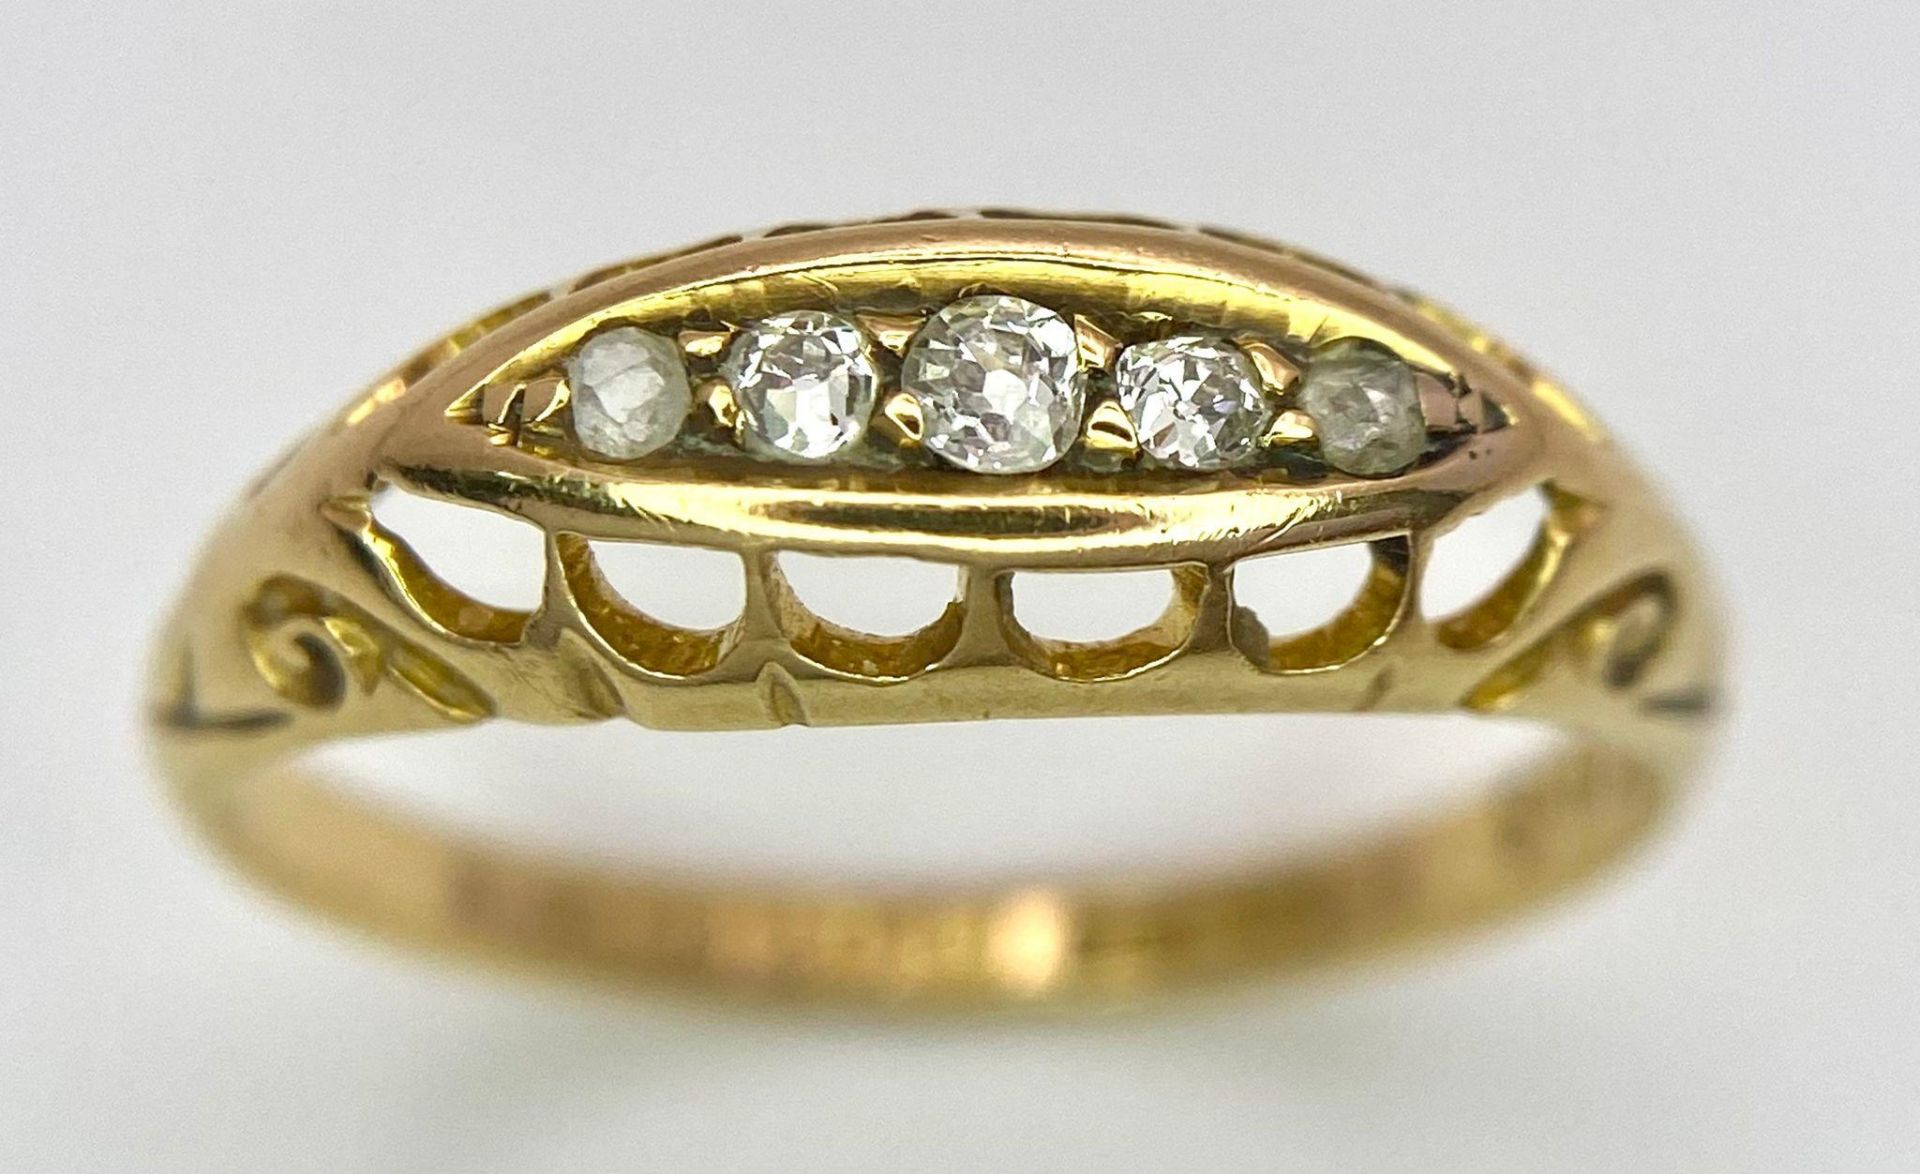 A Vintage 18K Yellow Gold Five Stone Diamond Ring. Full UK hallmarks. Size P. 2.5g total weight. - Image 2 of 8